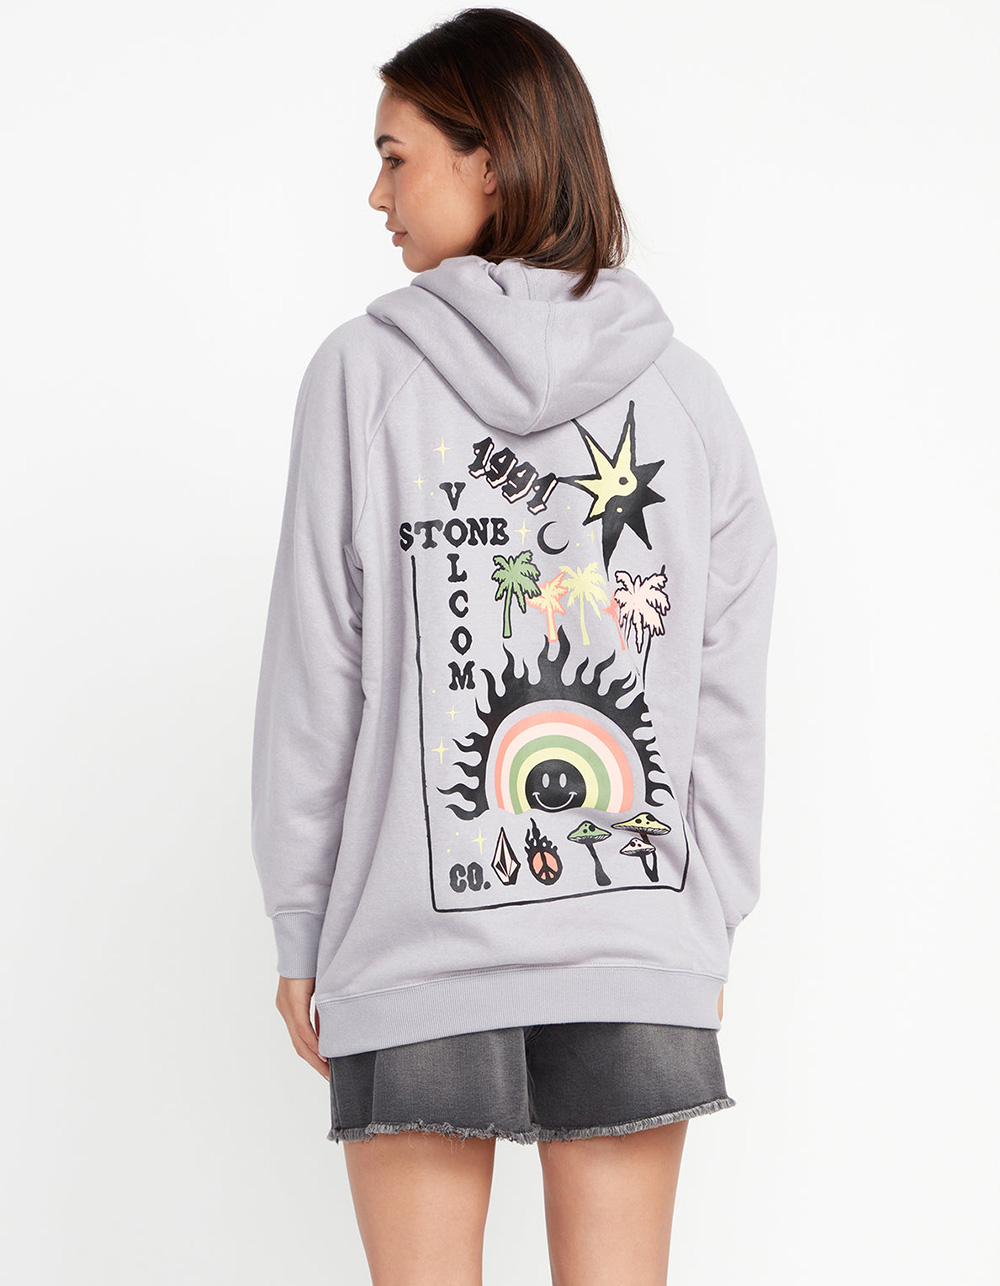 VOLCOM Truly Stoked Womens Hoodie - GRAY | Tillys